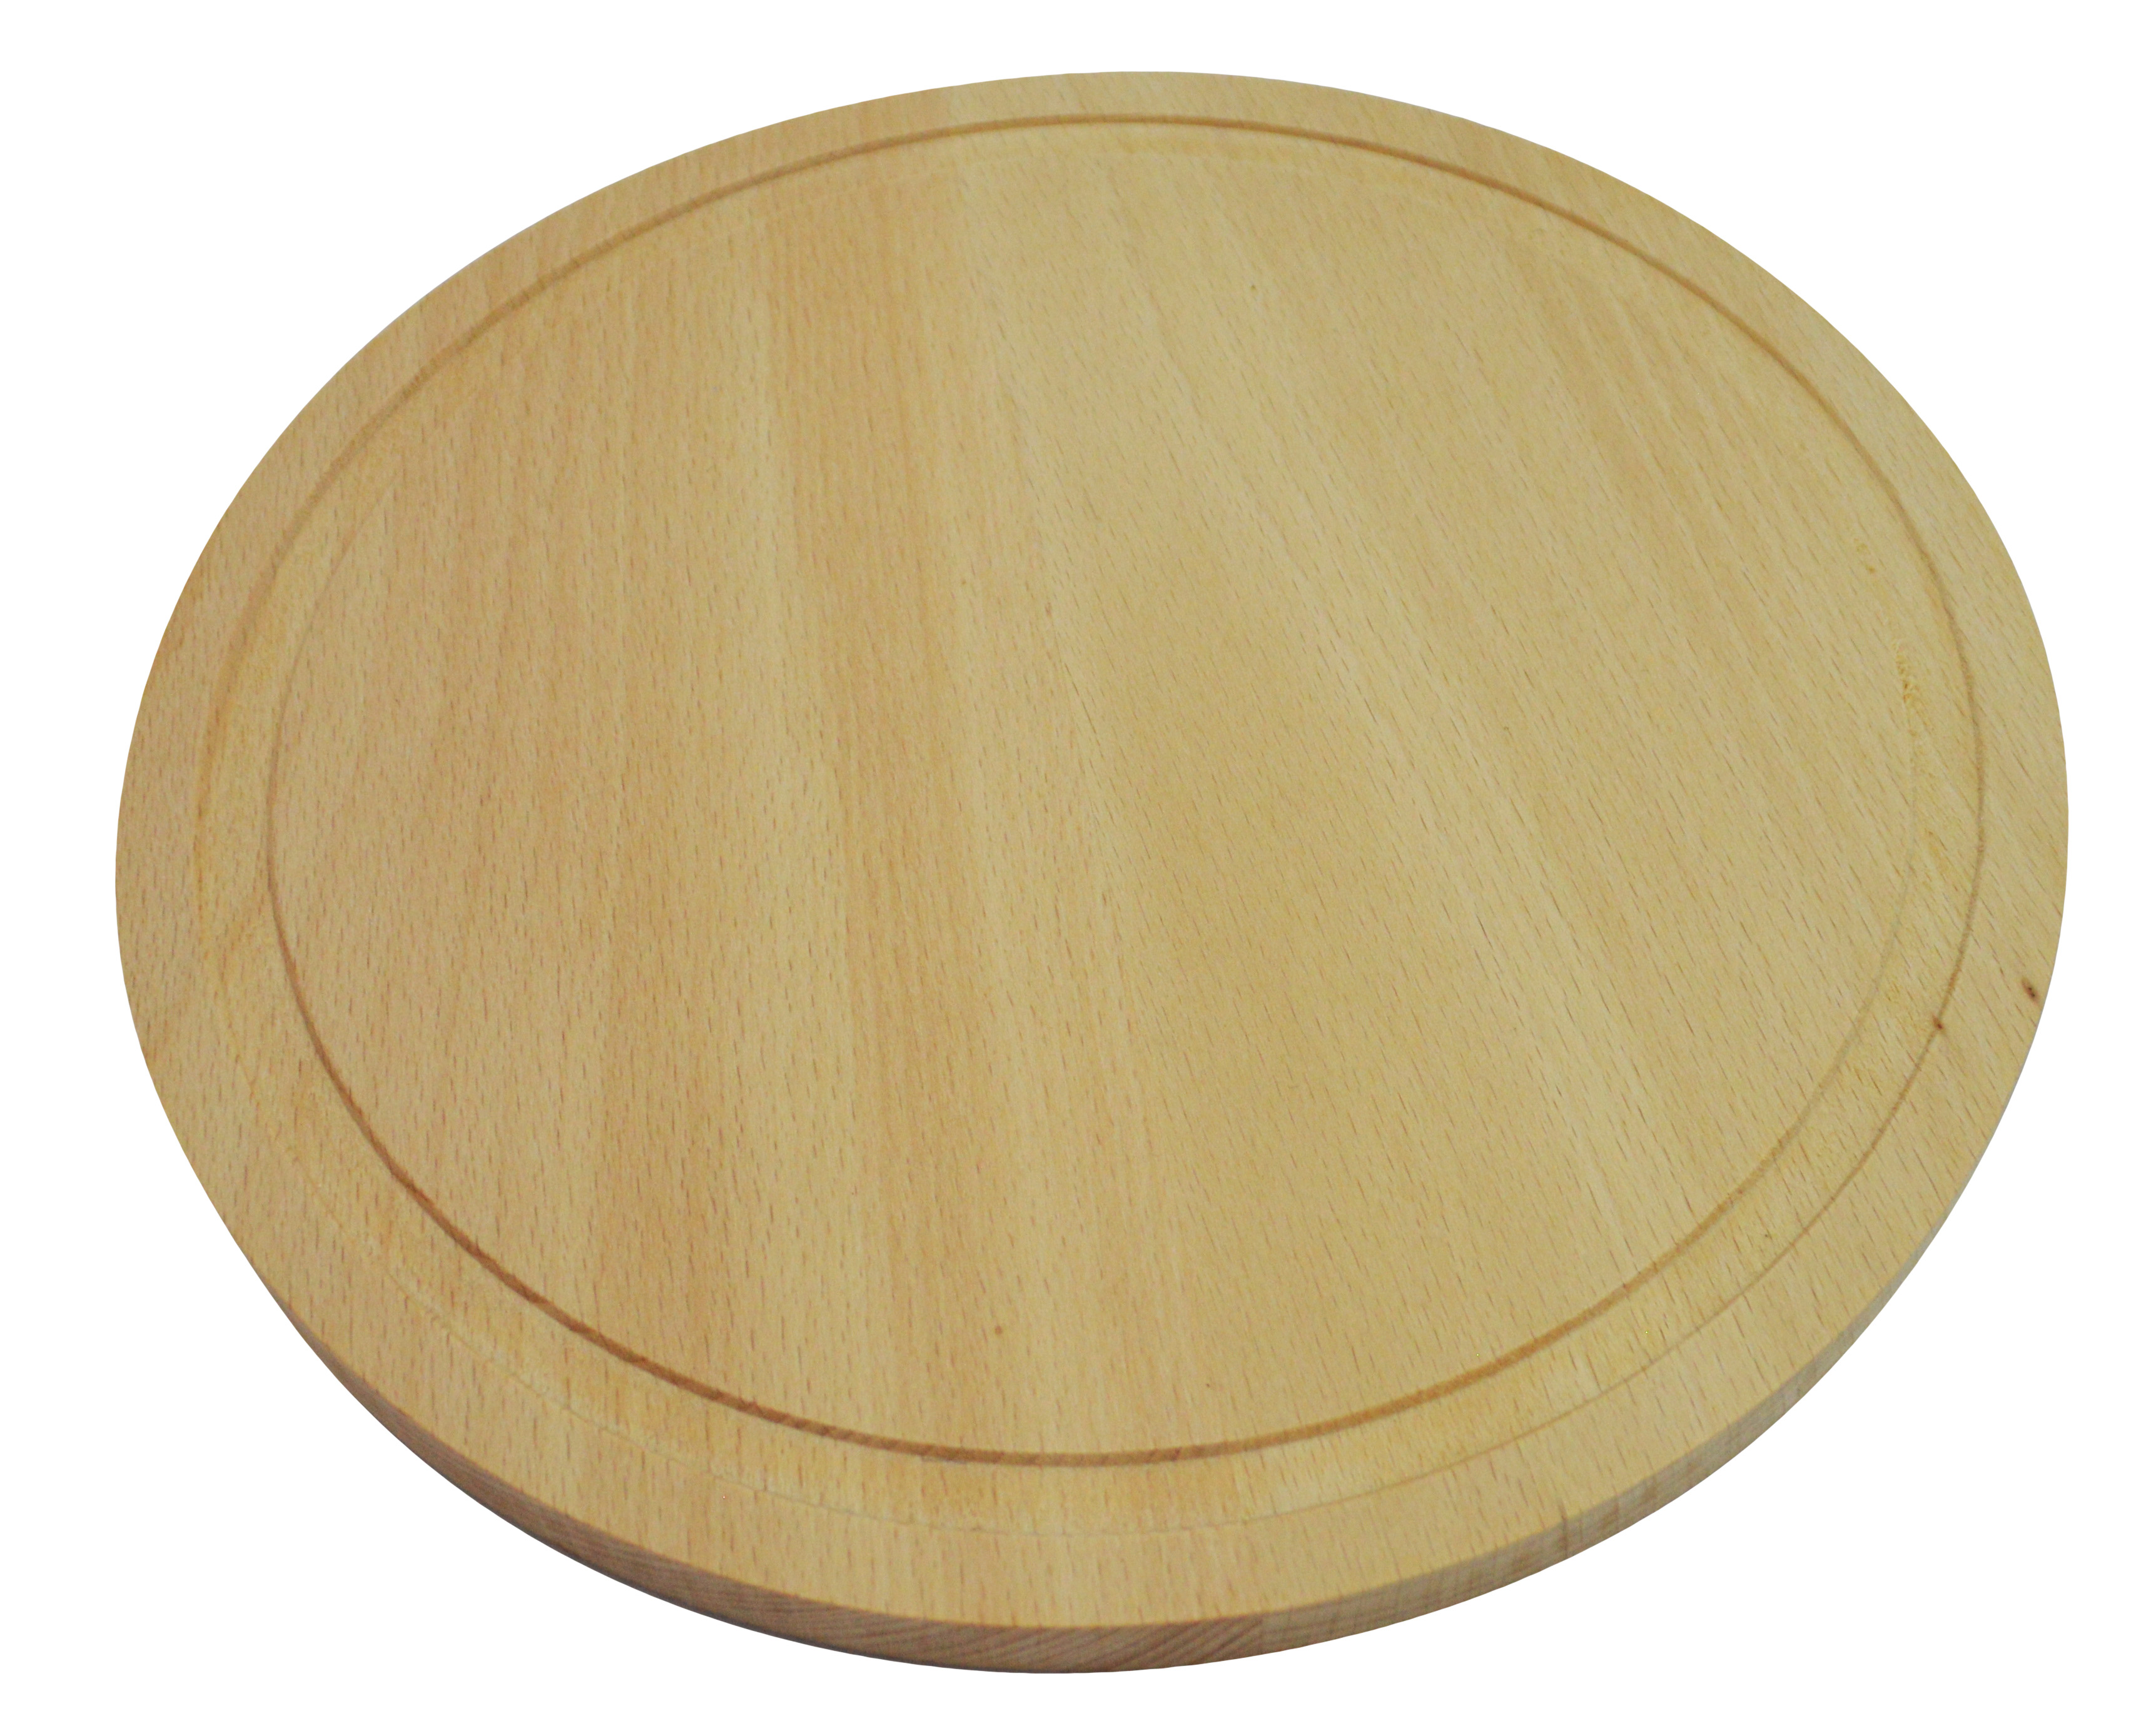 Circular Wooden Cutting Chopping Board Solid Wood Round 25 Cm 10 Inch With Lines Ebay 